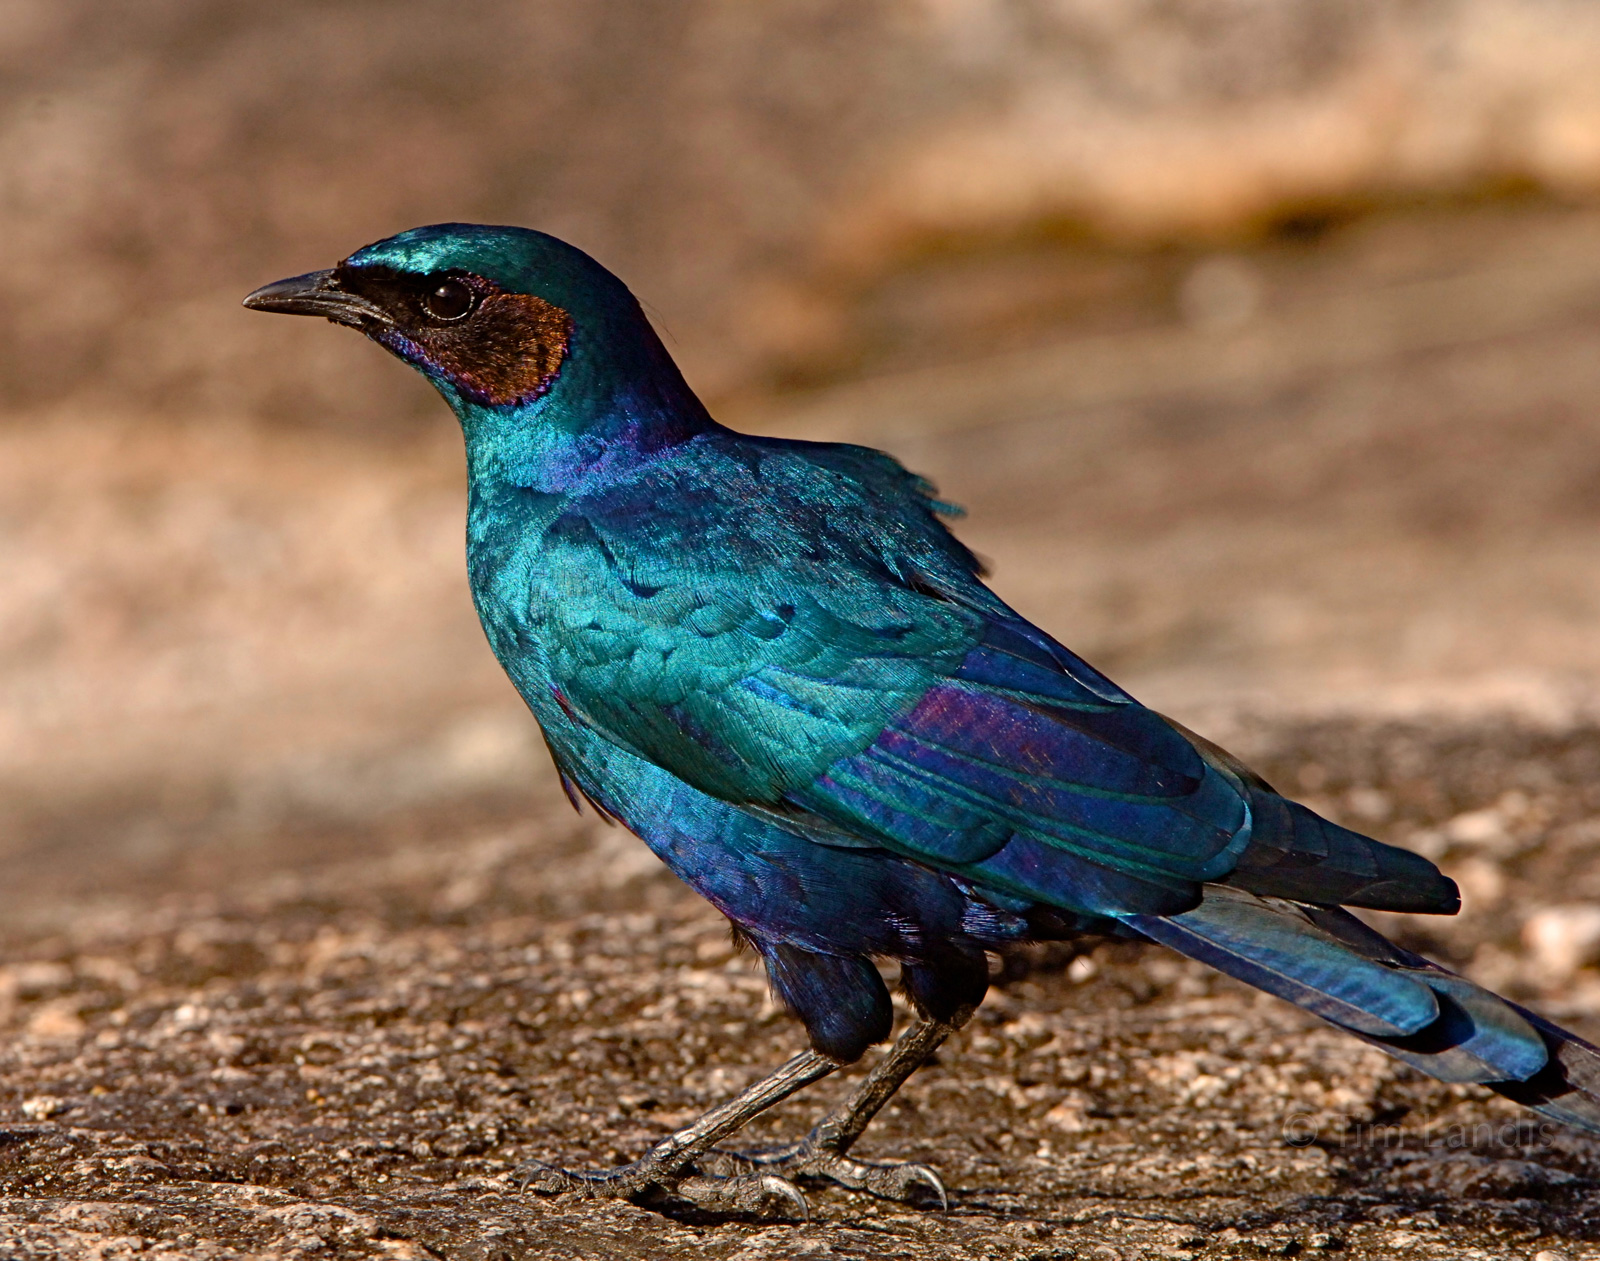 Superb starling shows his stuff